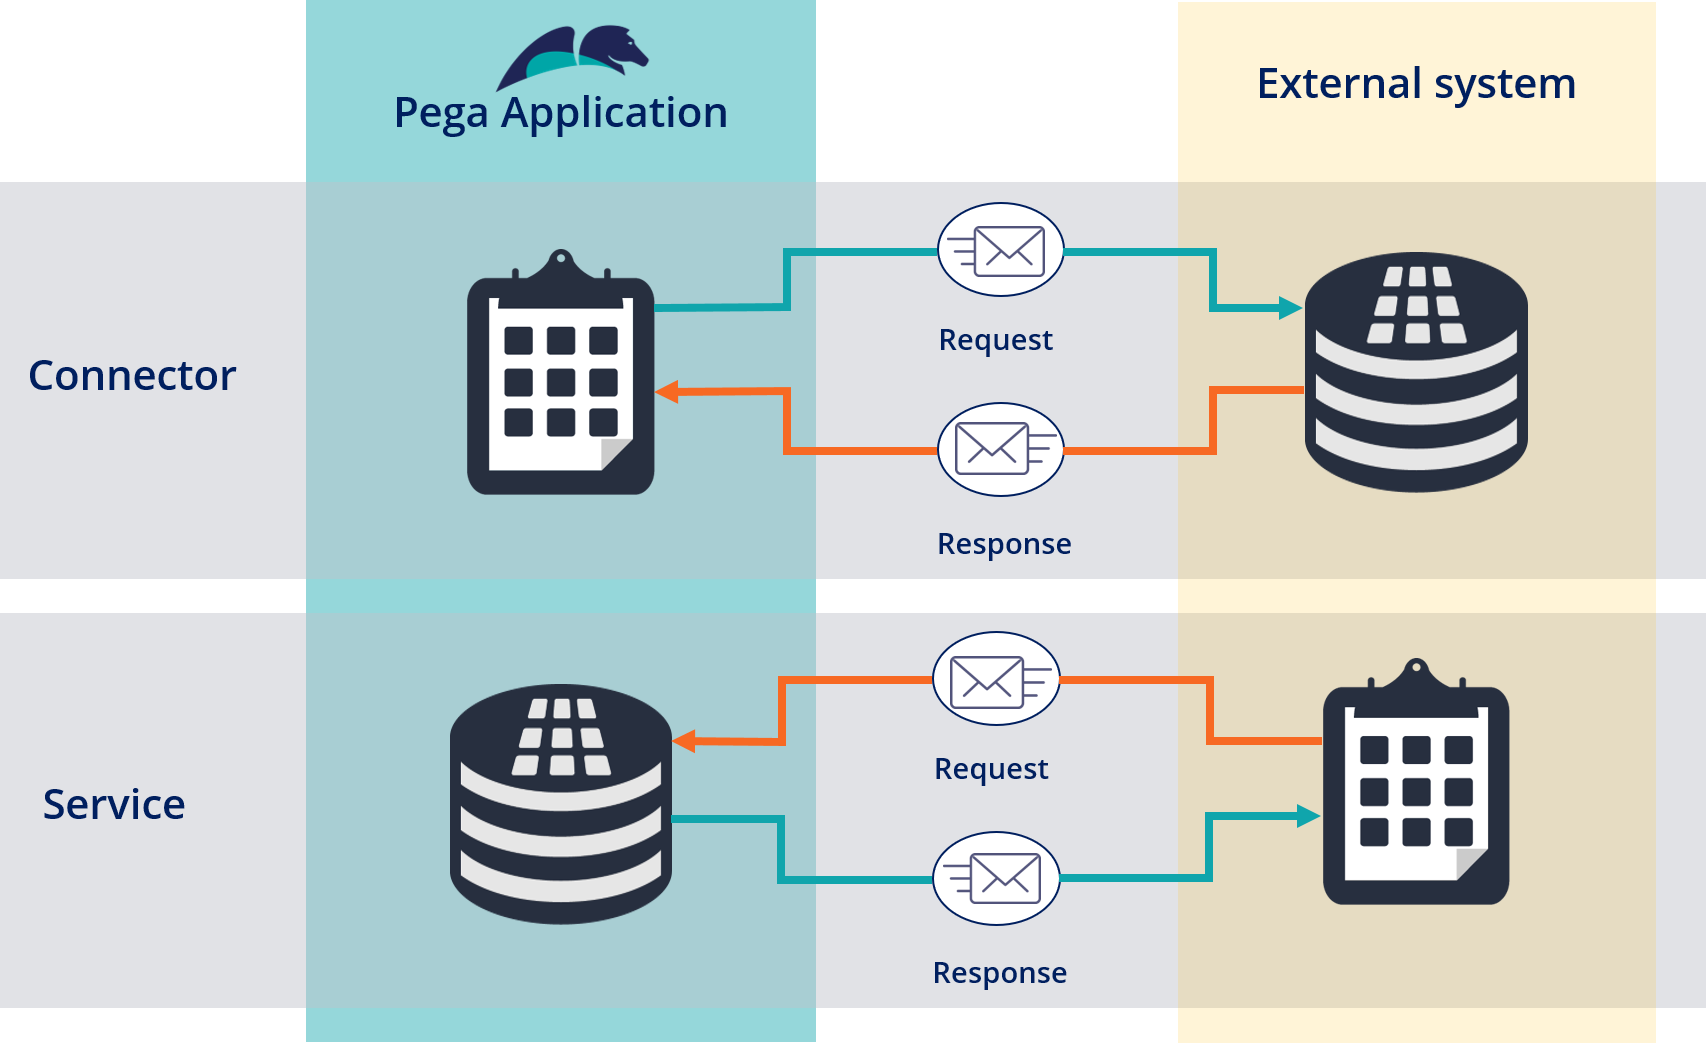 A diagram that shows Pega Platform requesting information from an external source (connector) and an external source requesting information from Pega Platform (service).